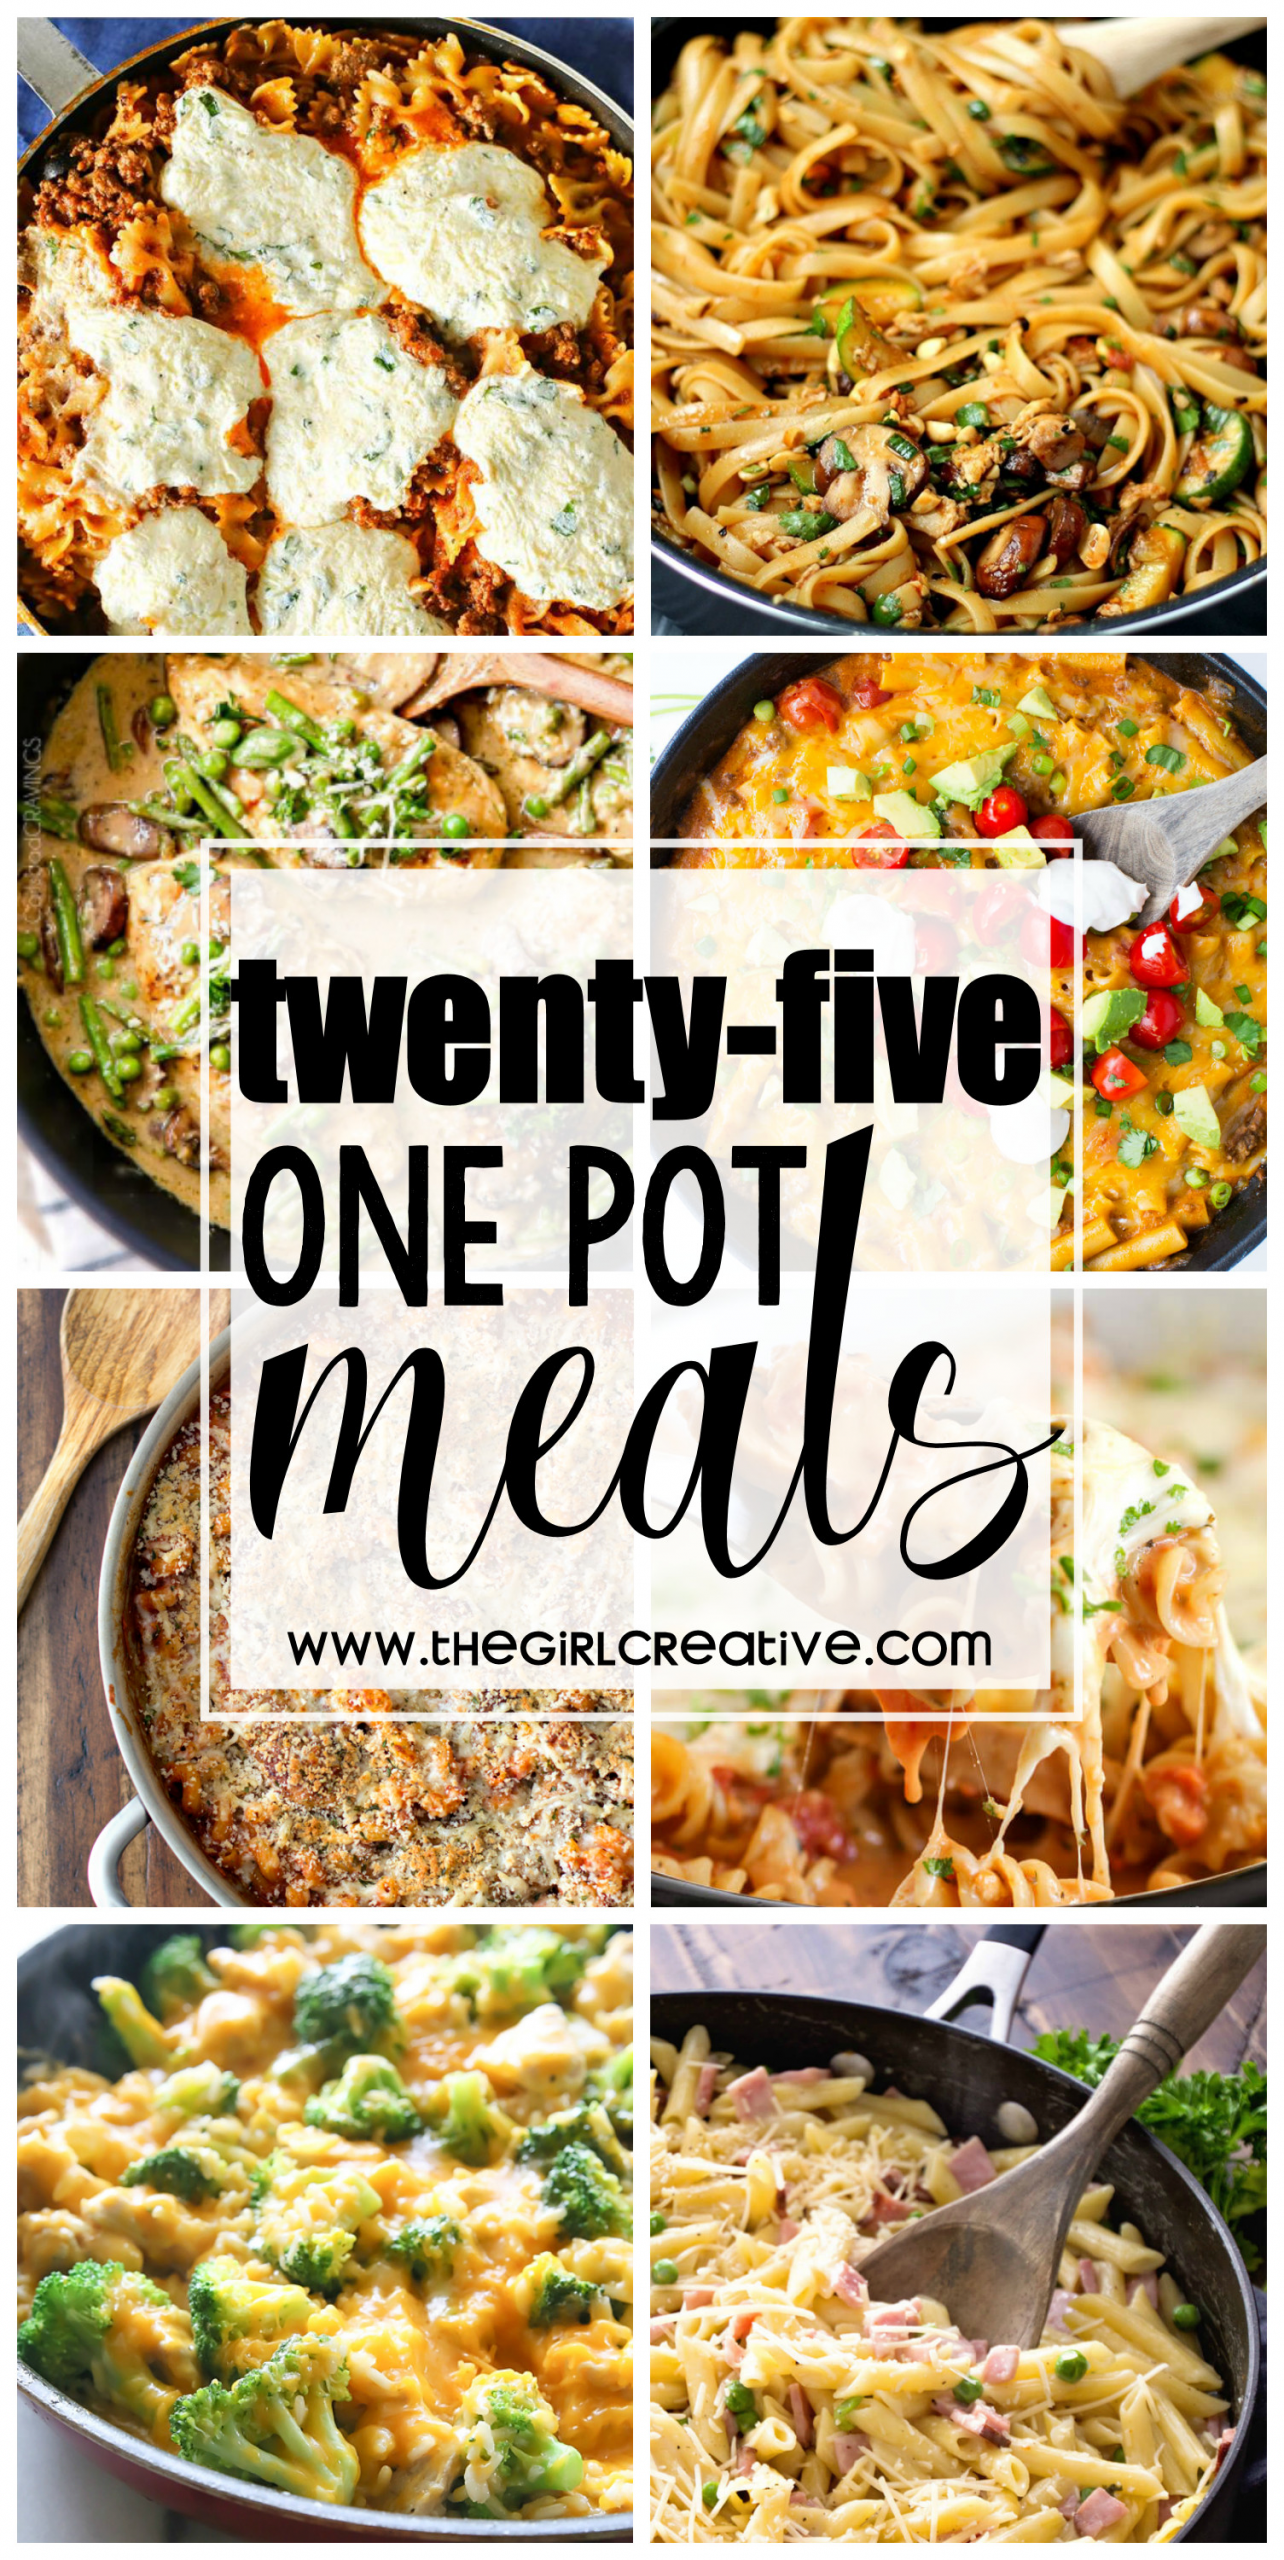 Quick One Pot Dinners
 e Pot Meals for the Busy Sports Mom The Girl Creative